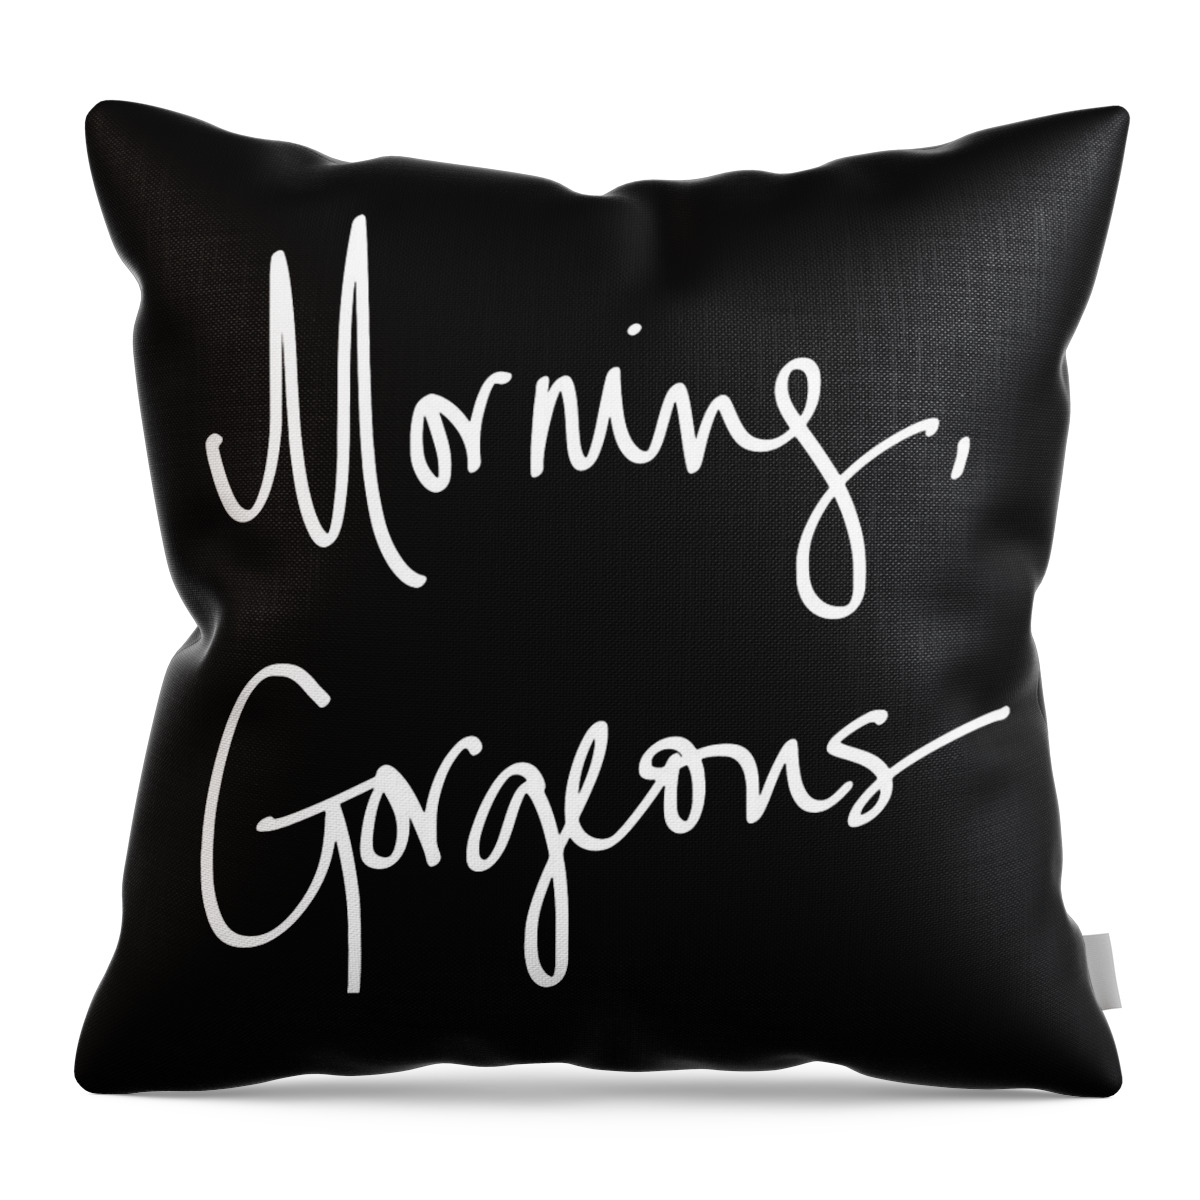 Morning Throw Pillow featuring the digital art Morning Gorgeous by South Social Studio